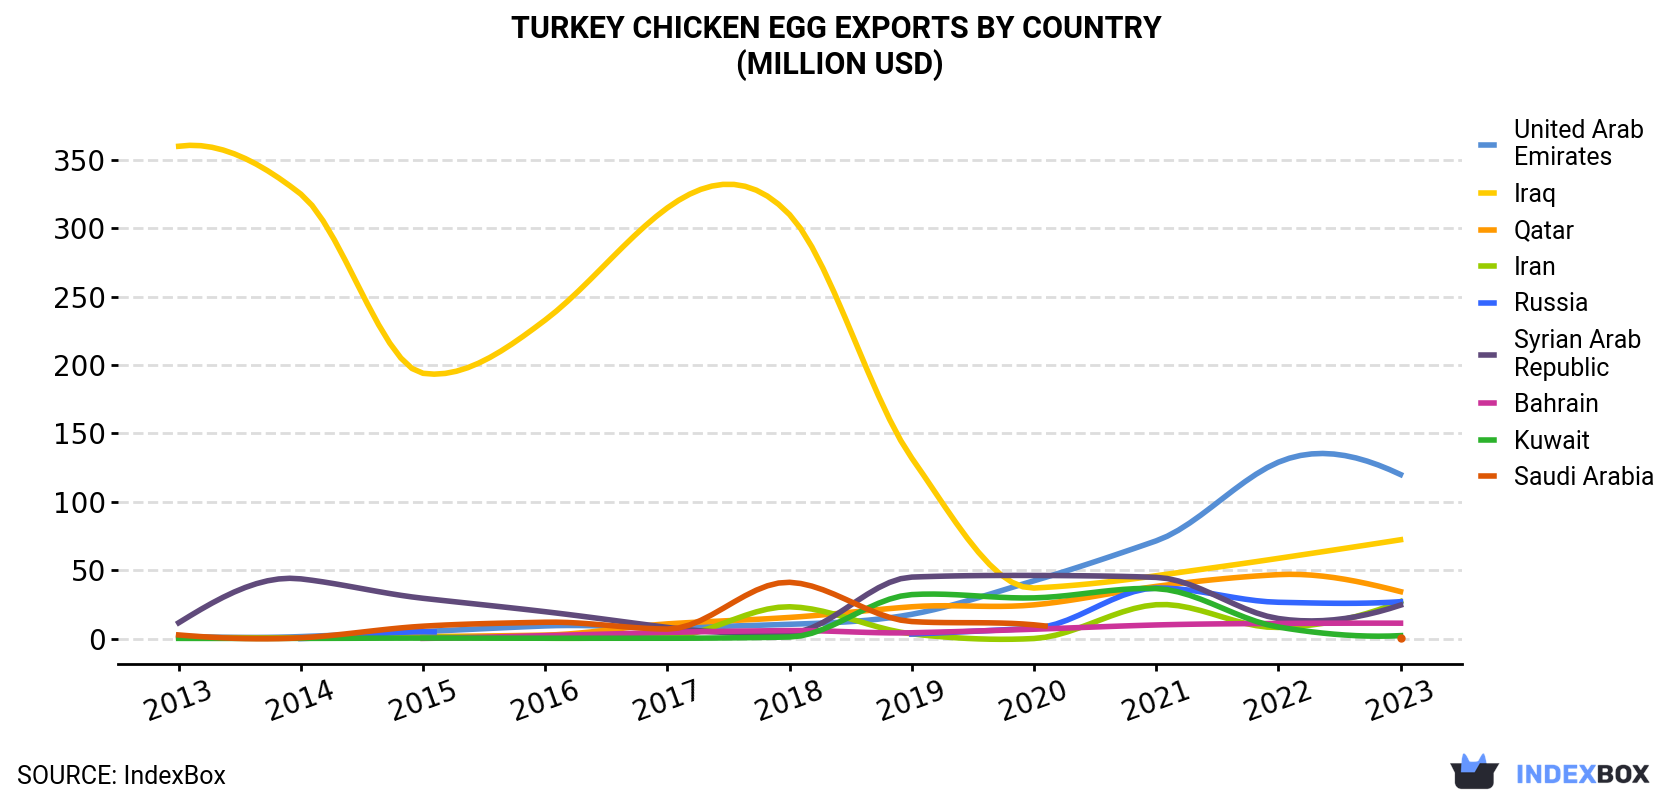 Turkey Chicken Egg Exports By Country (Million USD)